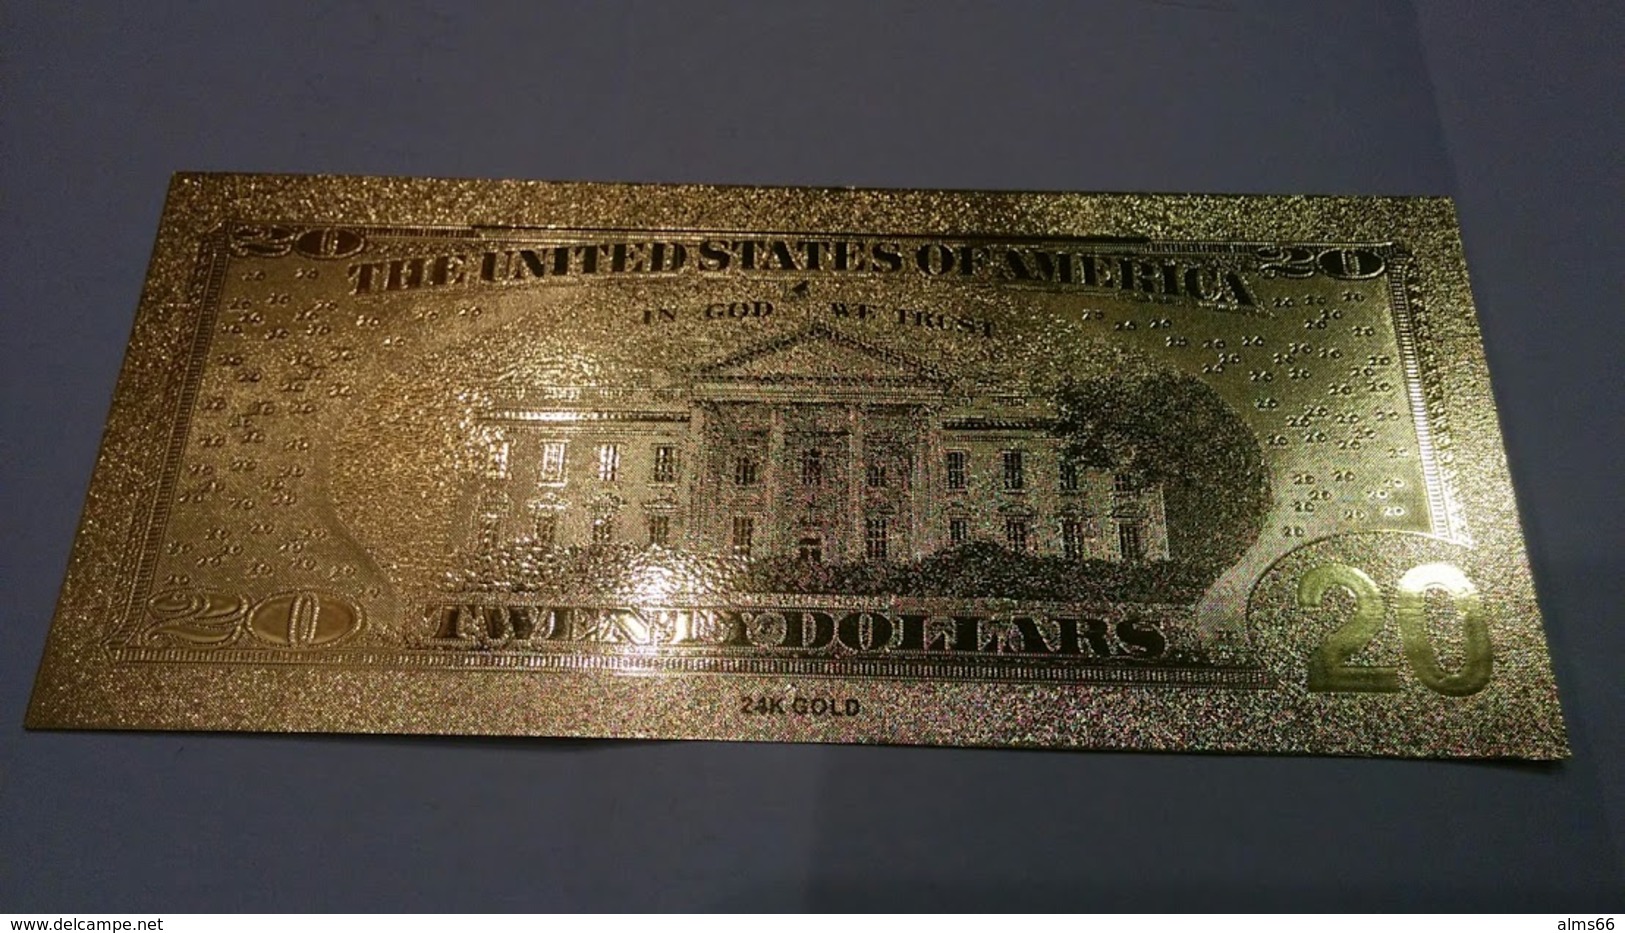 USA 20 Dollar 2006 UNC - Gold Plated - Very Nice But Not Real Money! - Federal Reserve Notes (1928-...)